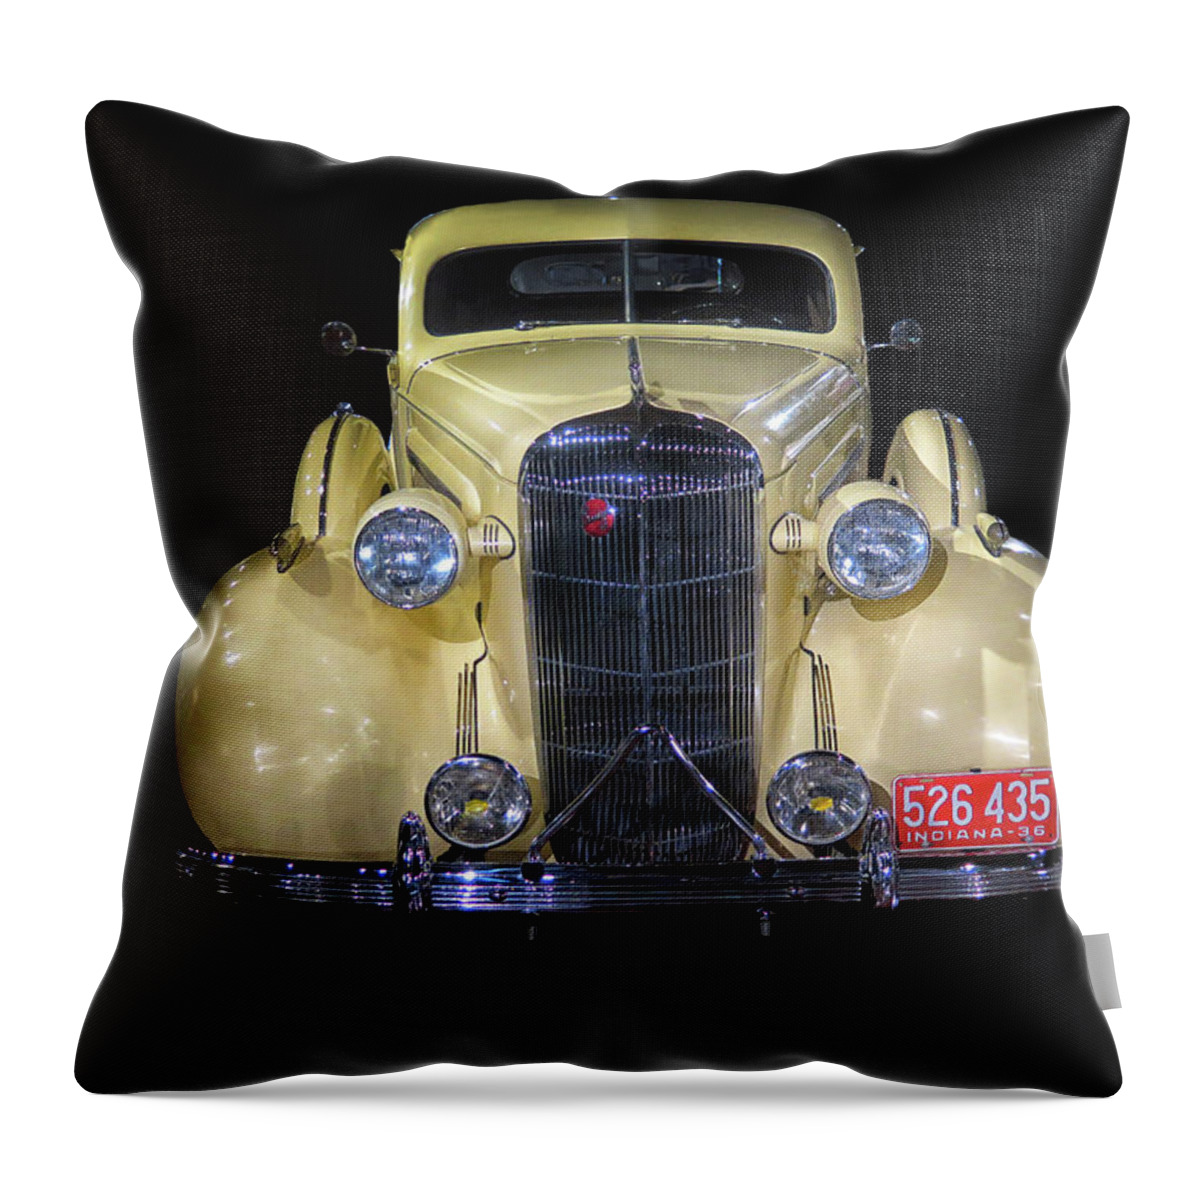 1936 Buick Business Coupe Throw Pillow featuring the photograph 1936 Buick Business Coupe by Dave Mills